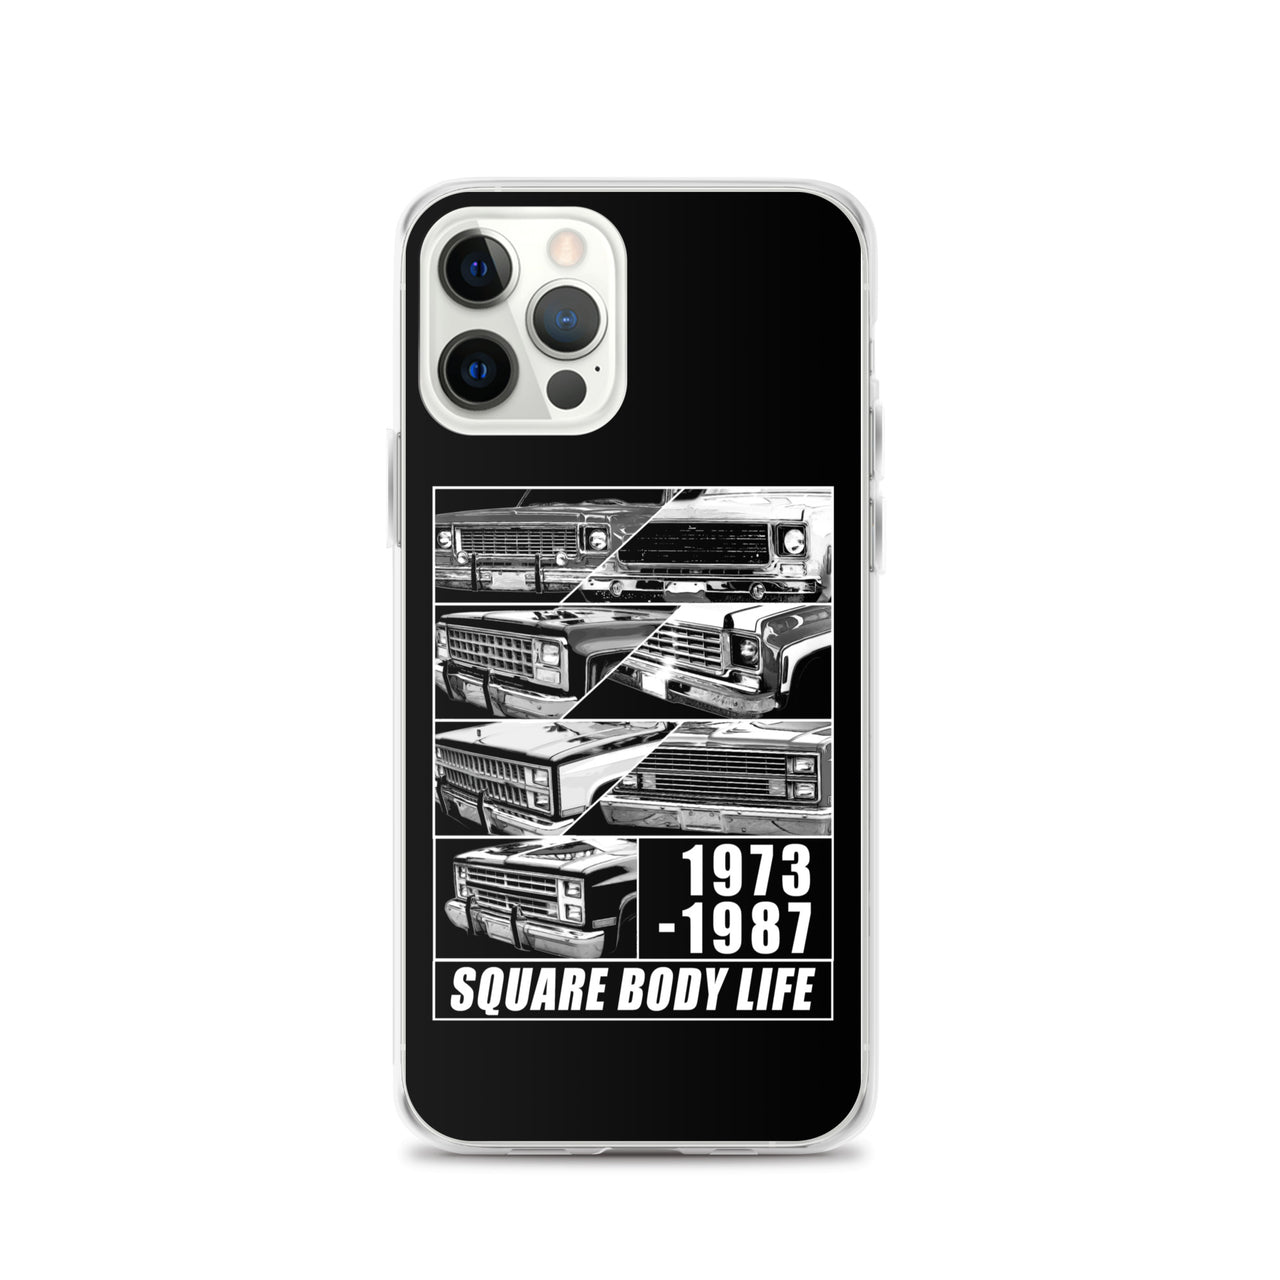 Square Body Truck Grilles Phone Case For iPhone 12 pro max